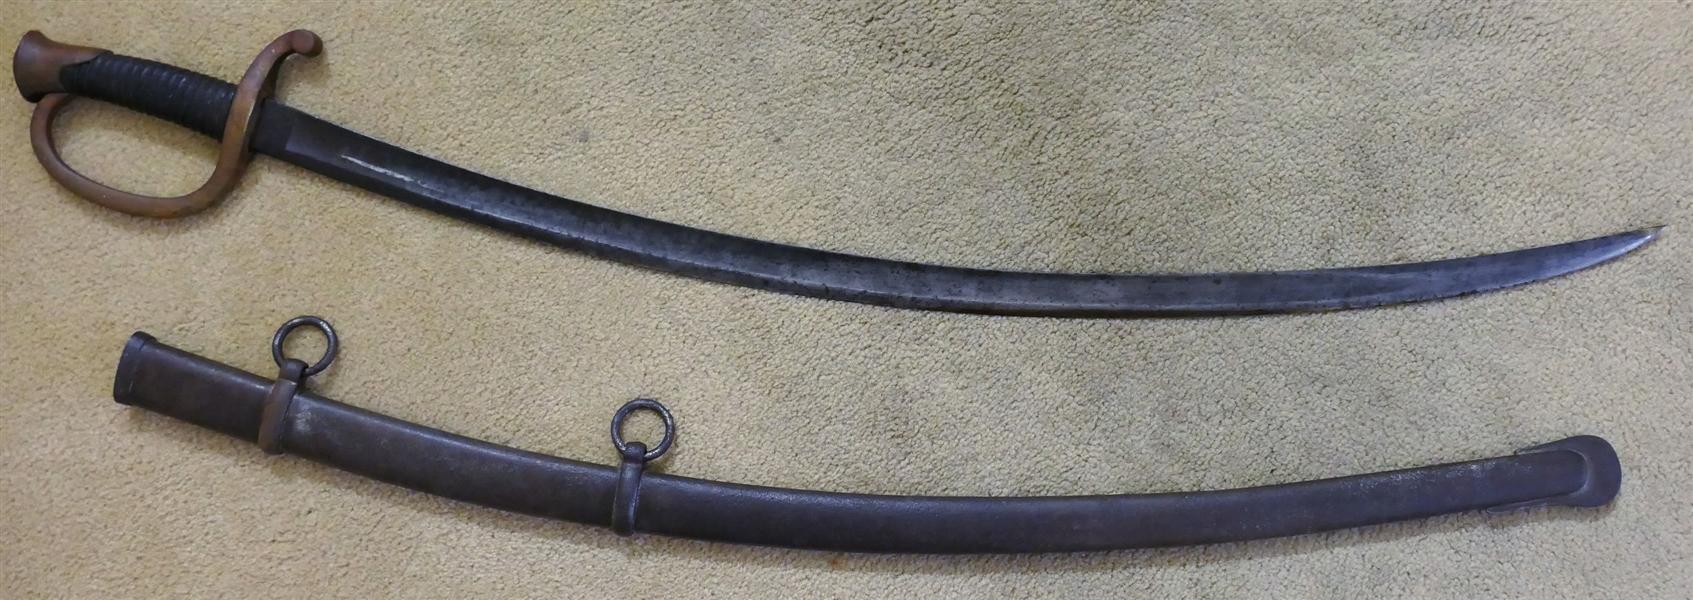 Ames Manufacturing Company Civil War Model 1840 Light Artillery Saber with Scabbard - Guard Marked - A.D.K.  And 18 - Scabbard Has 2 Rings - Blade Measures  32" Long 